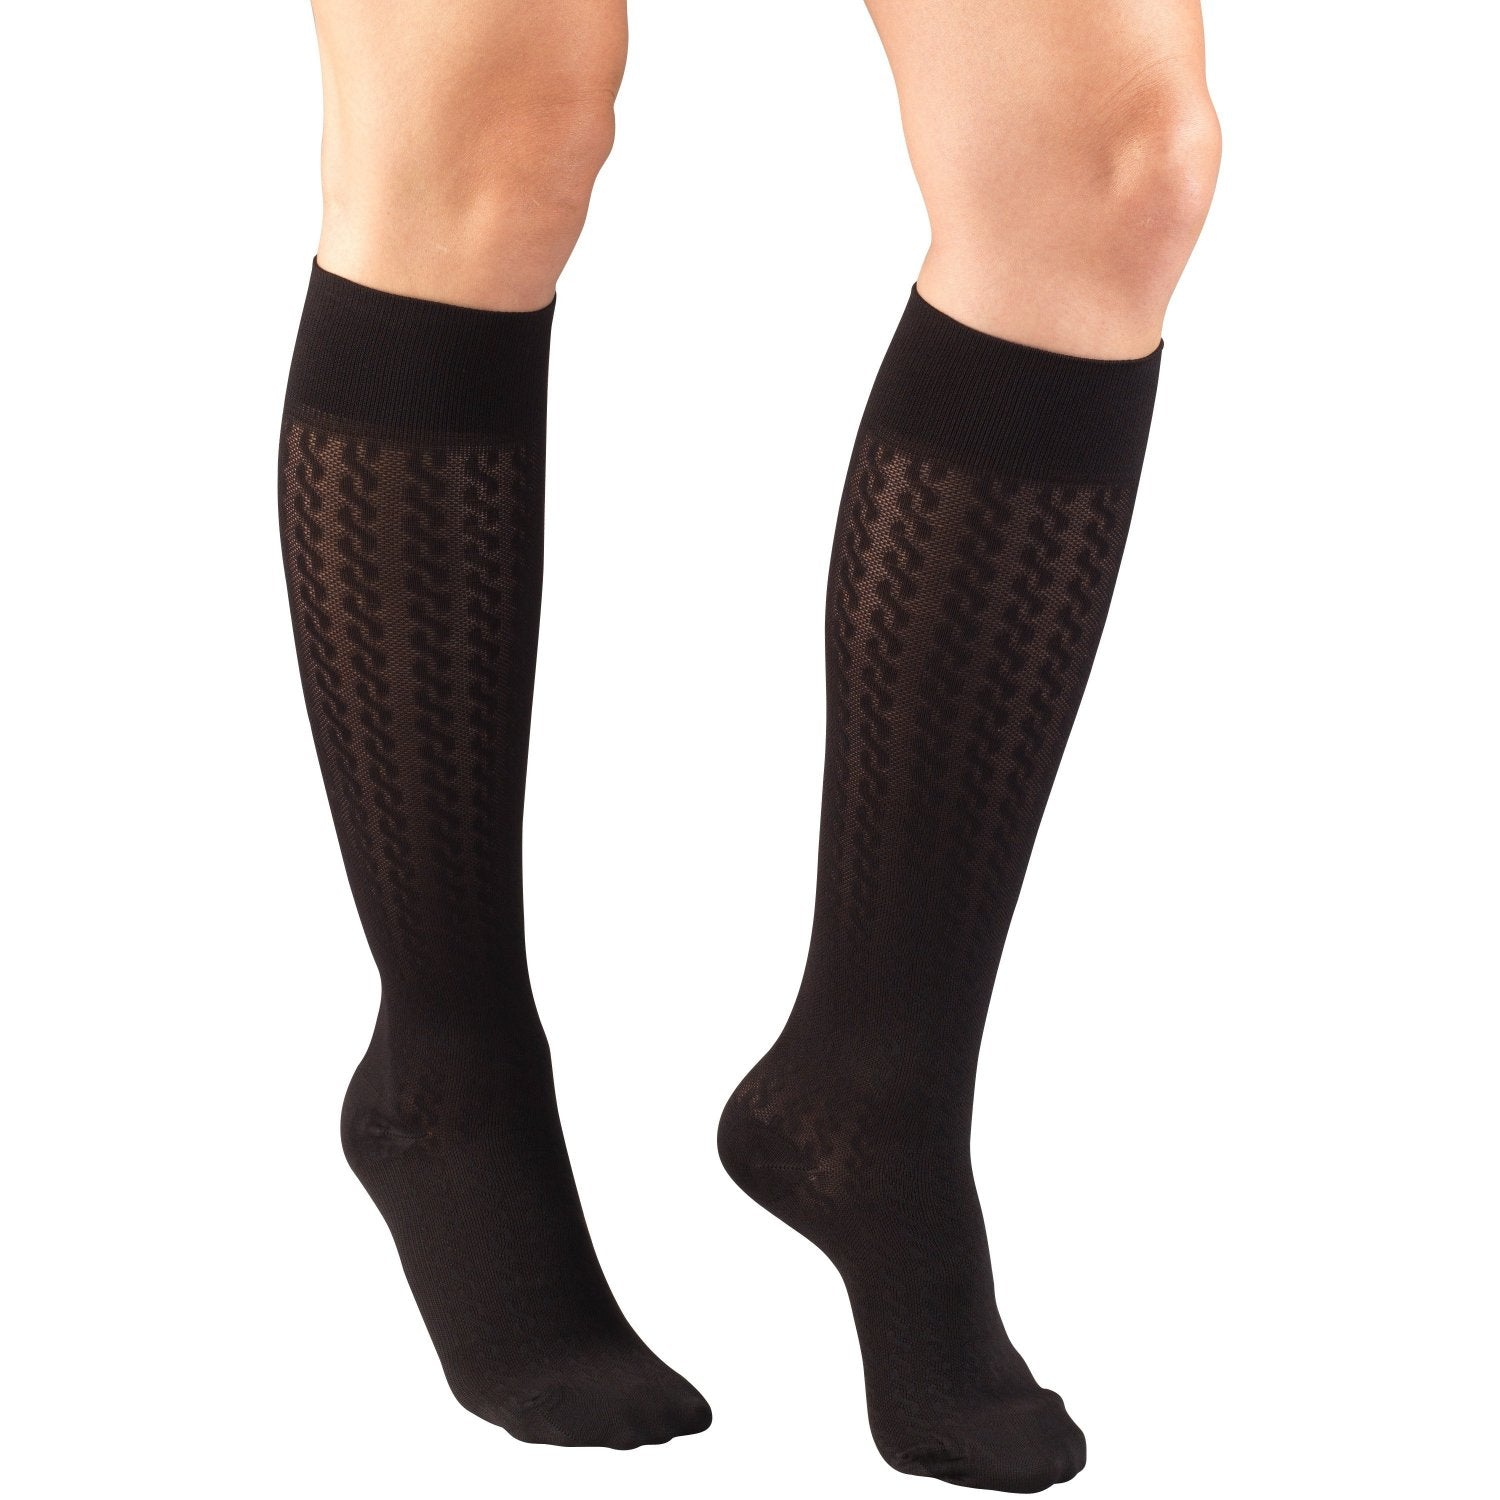 Jobst Activa Sheer Therapy Diamond Dress Socks  Lymphedema Products